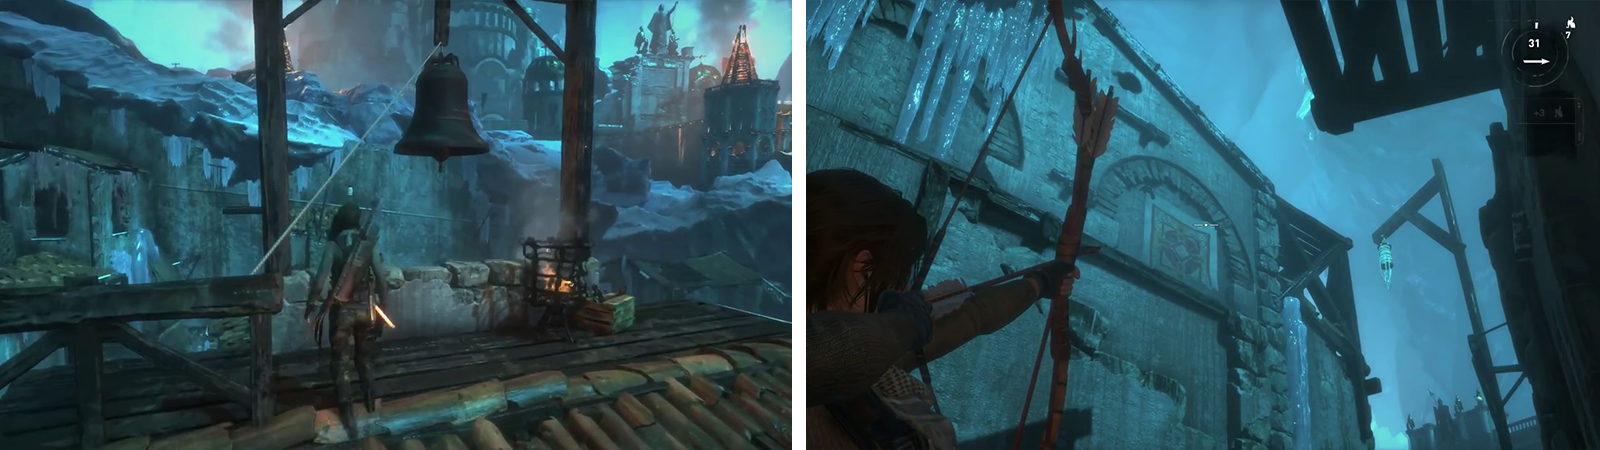 As you explore the area search for bells to cut down (left) and Banners to burn (right) for the area challenges.